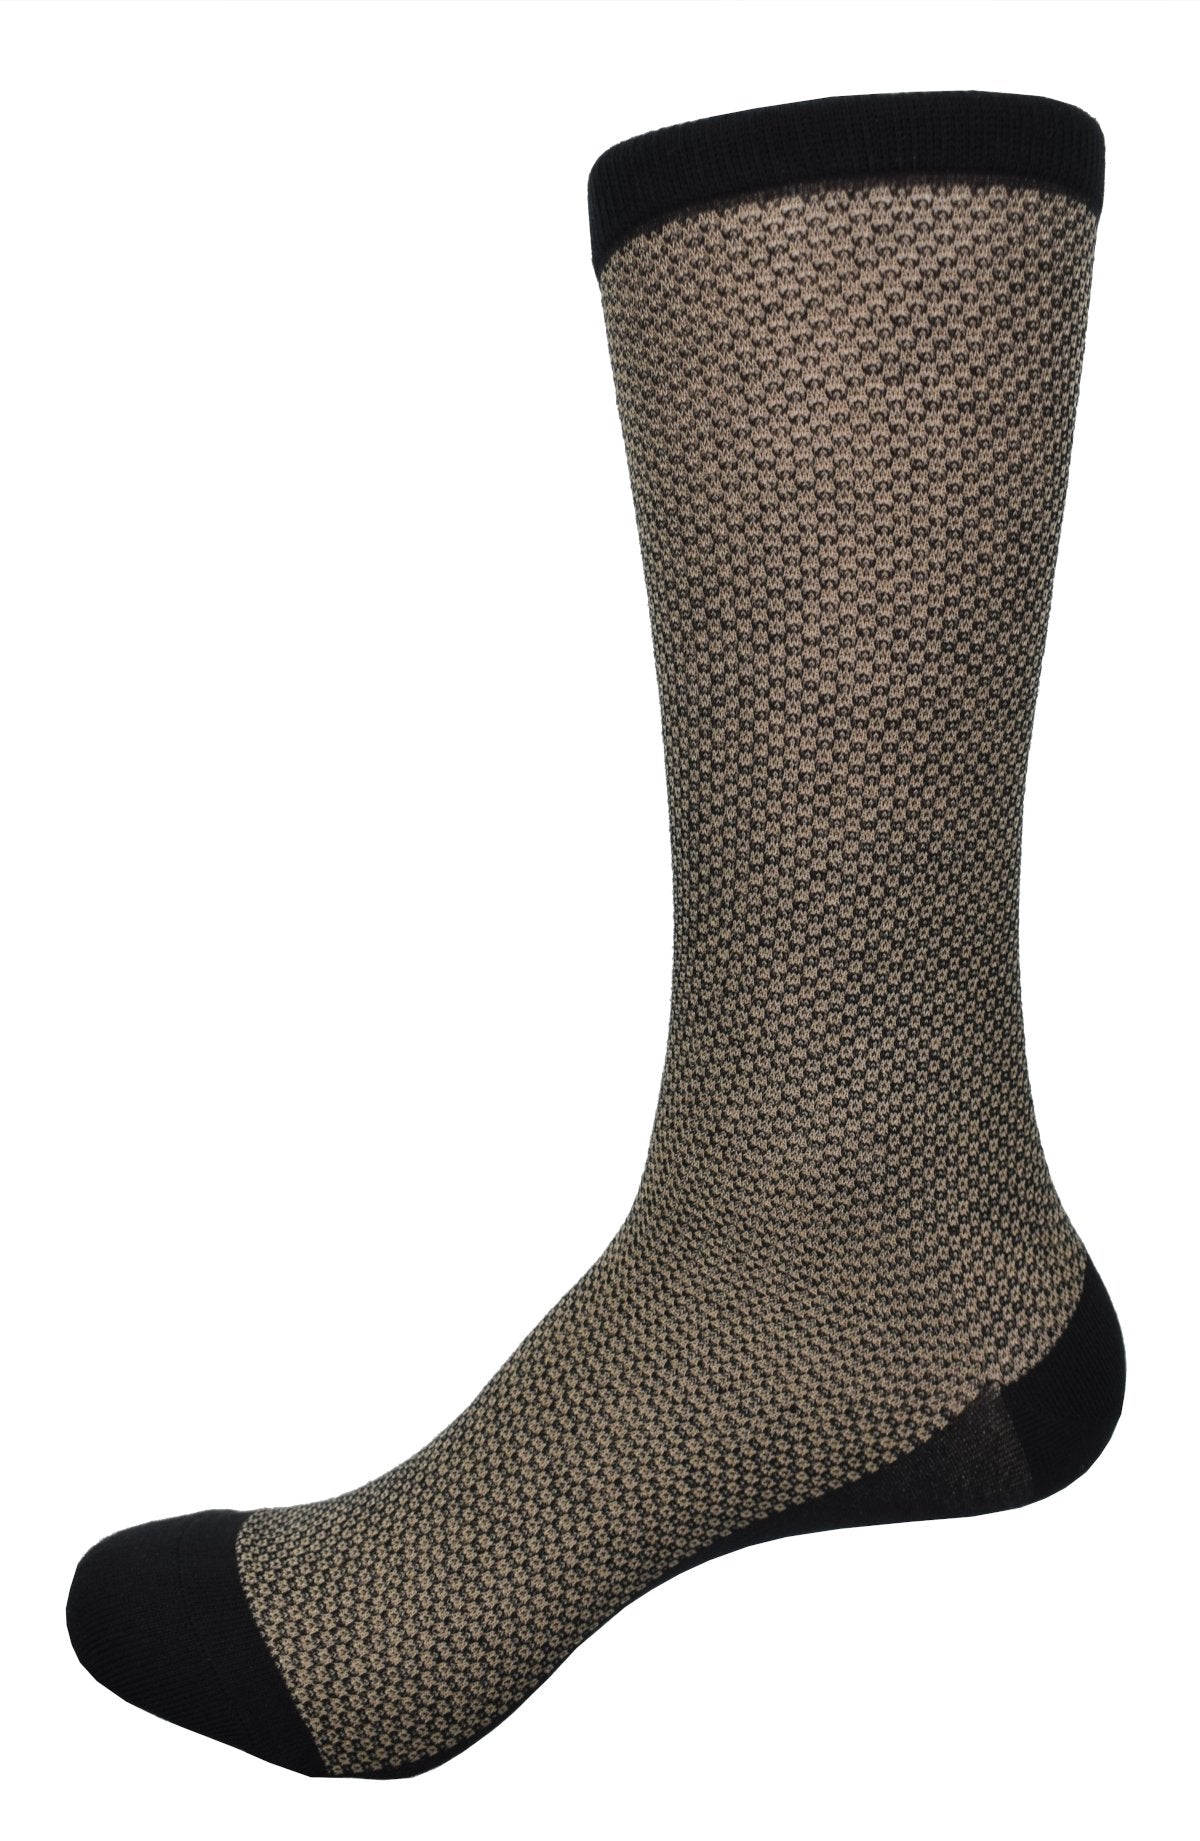 The ZV252 Tan Medallion Sock is your perfect accessory for any dress or casual attire. Made with soft, rich mercerized cotton and a fine medallion weave, these socks offer both warmth and style. The warm tan color with black accents add a touch of sophistication to your overall look.